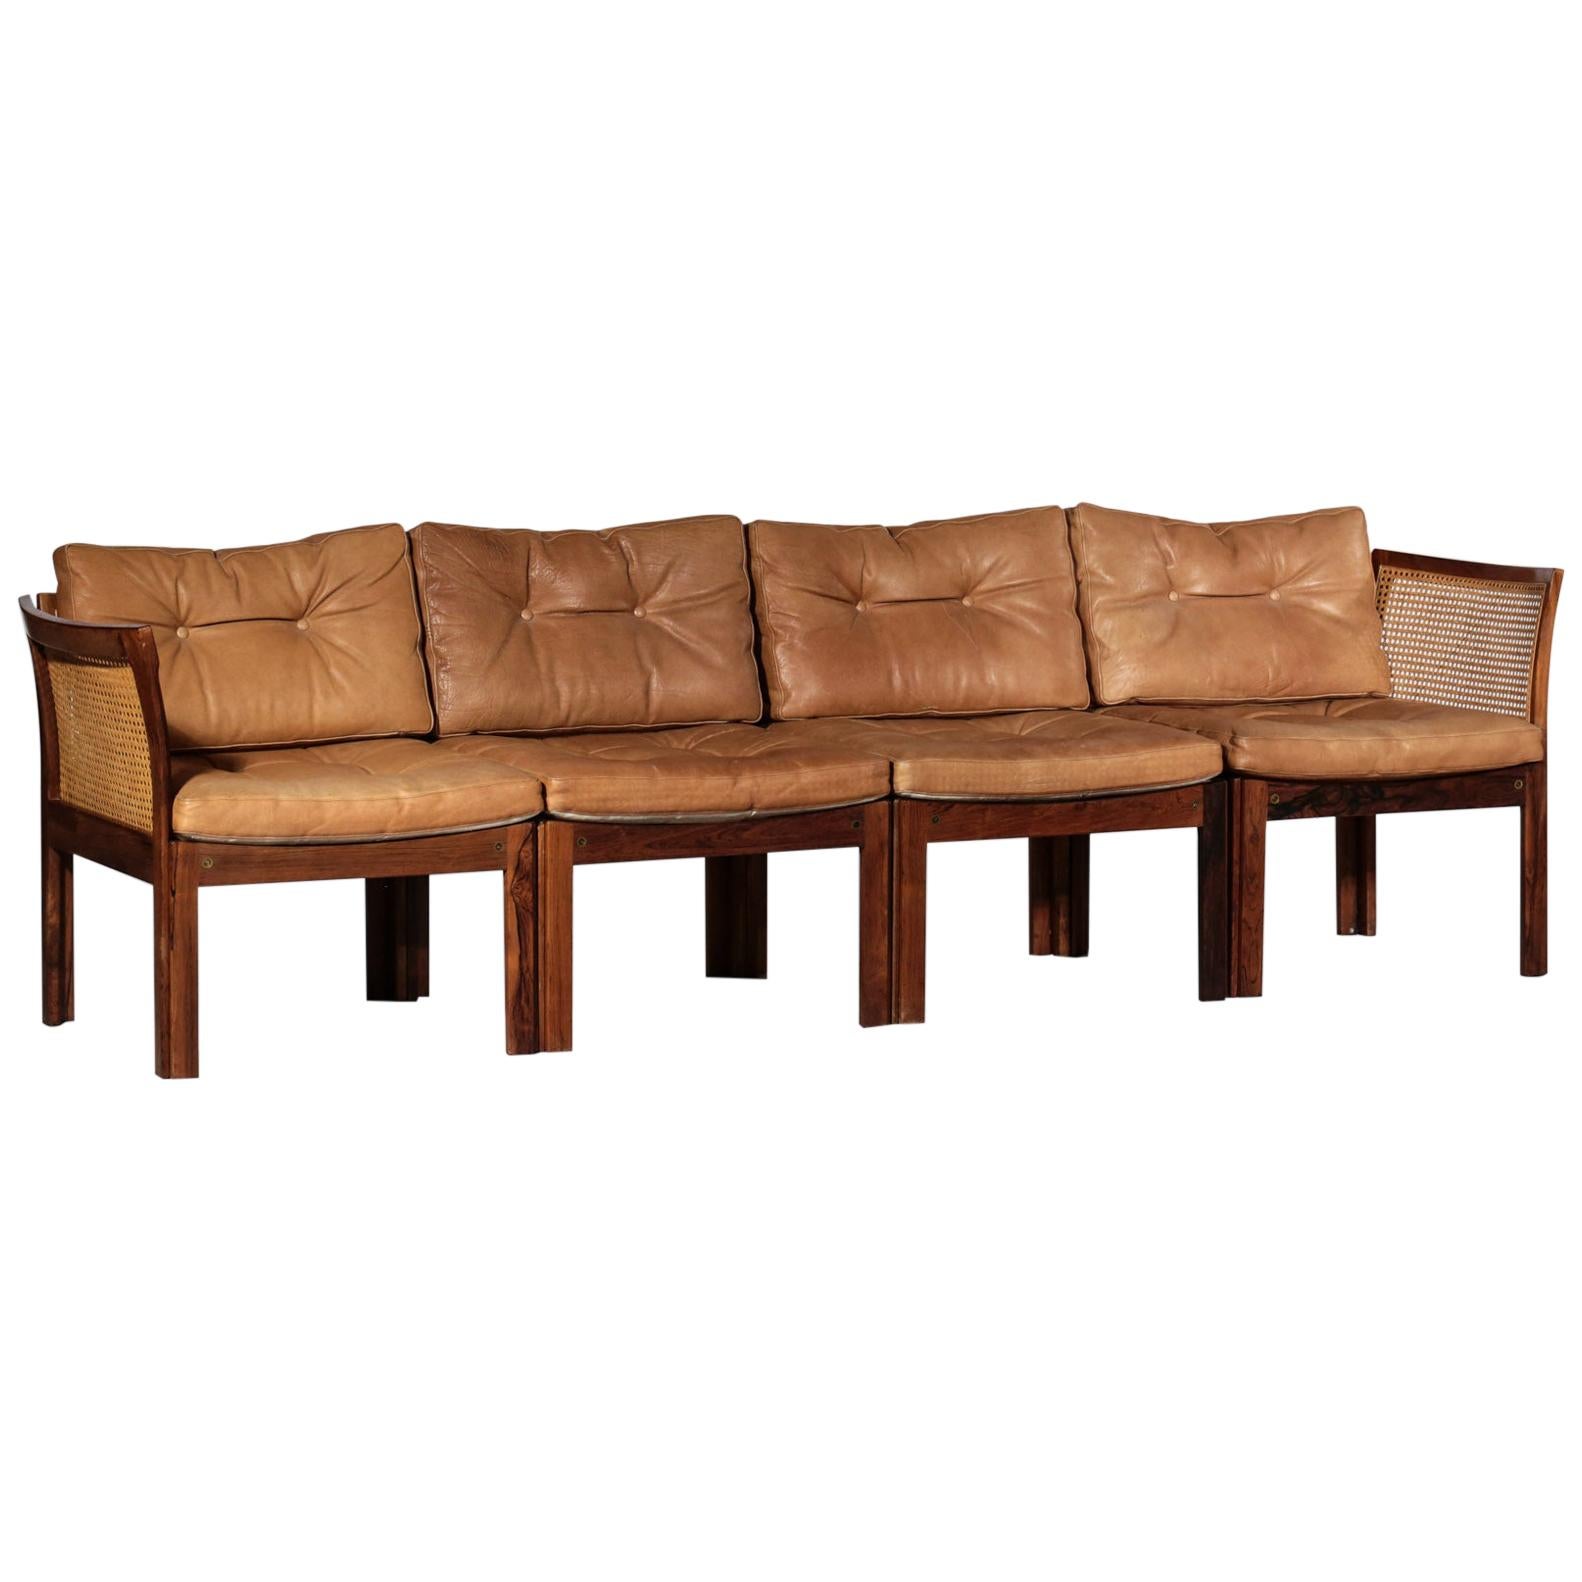 Illum Wikkelso Leather Sofa in Rosewood and Woven Rattan Cane For Sale